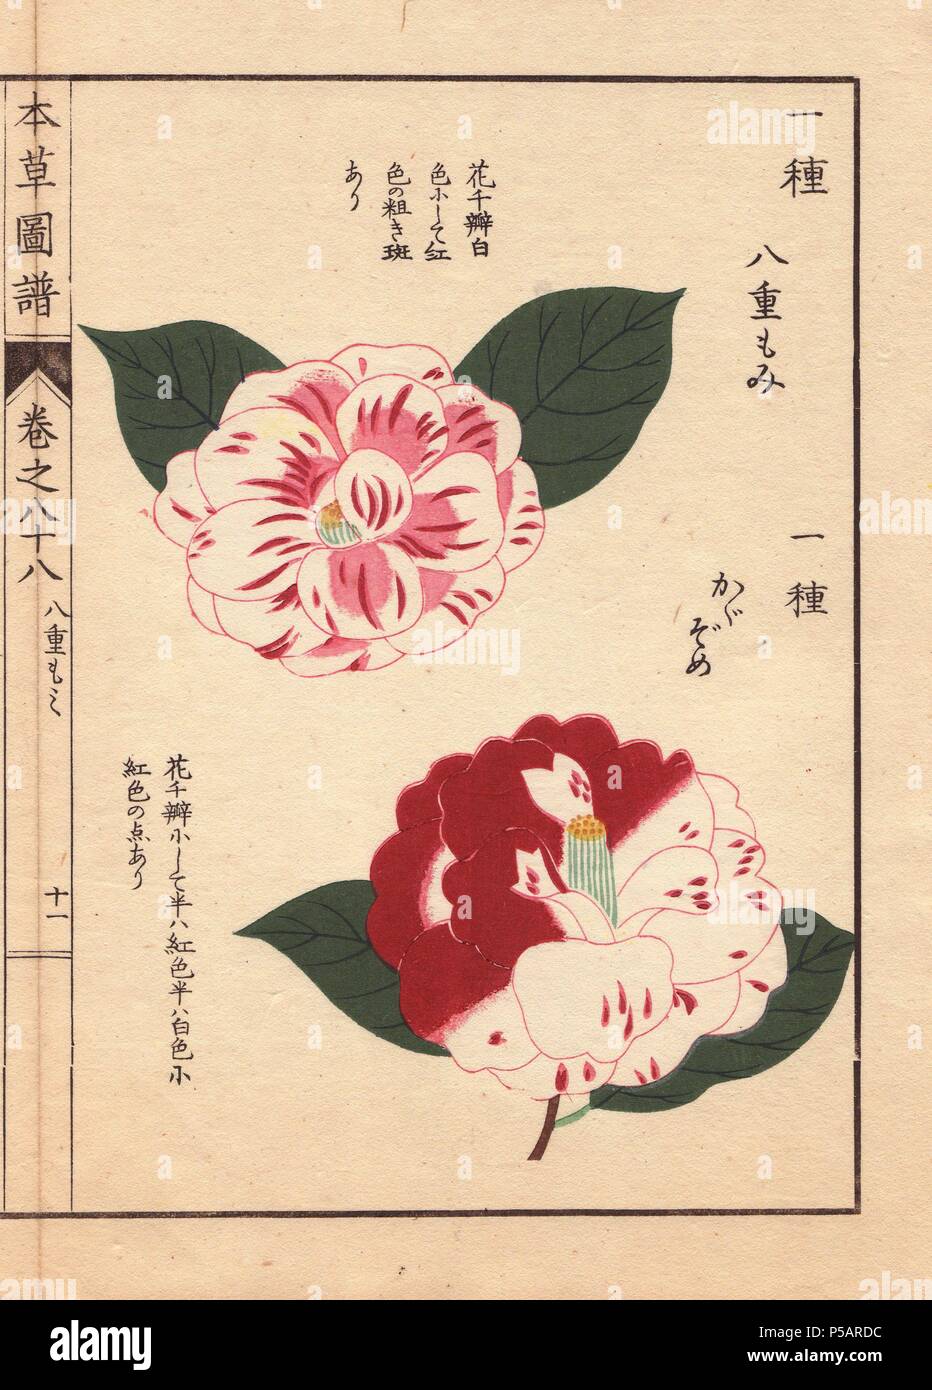 Scarlet and white camellias 'Yahemomiji' and 'Kagazome'. . Thea japonica Nois flore semipleno forma. . Colour-printed woodblock engraving by Kan'en Iwasaki from 'Honzo Zufu,' an Illustrated Guide to Medicinal Plants, 1884. Iwasaki (1786-1842) was a Japanese botanist, entomologist and zoologist. He was one of the first Japanese botanists to incorporate western knowledge into his studies. Stock Photo